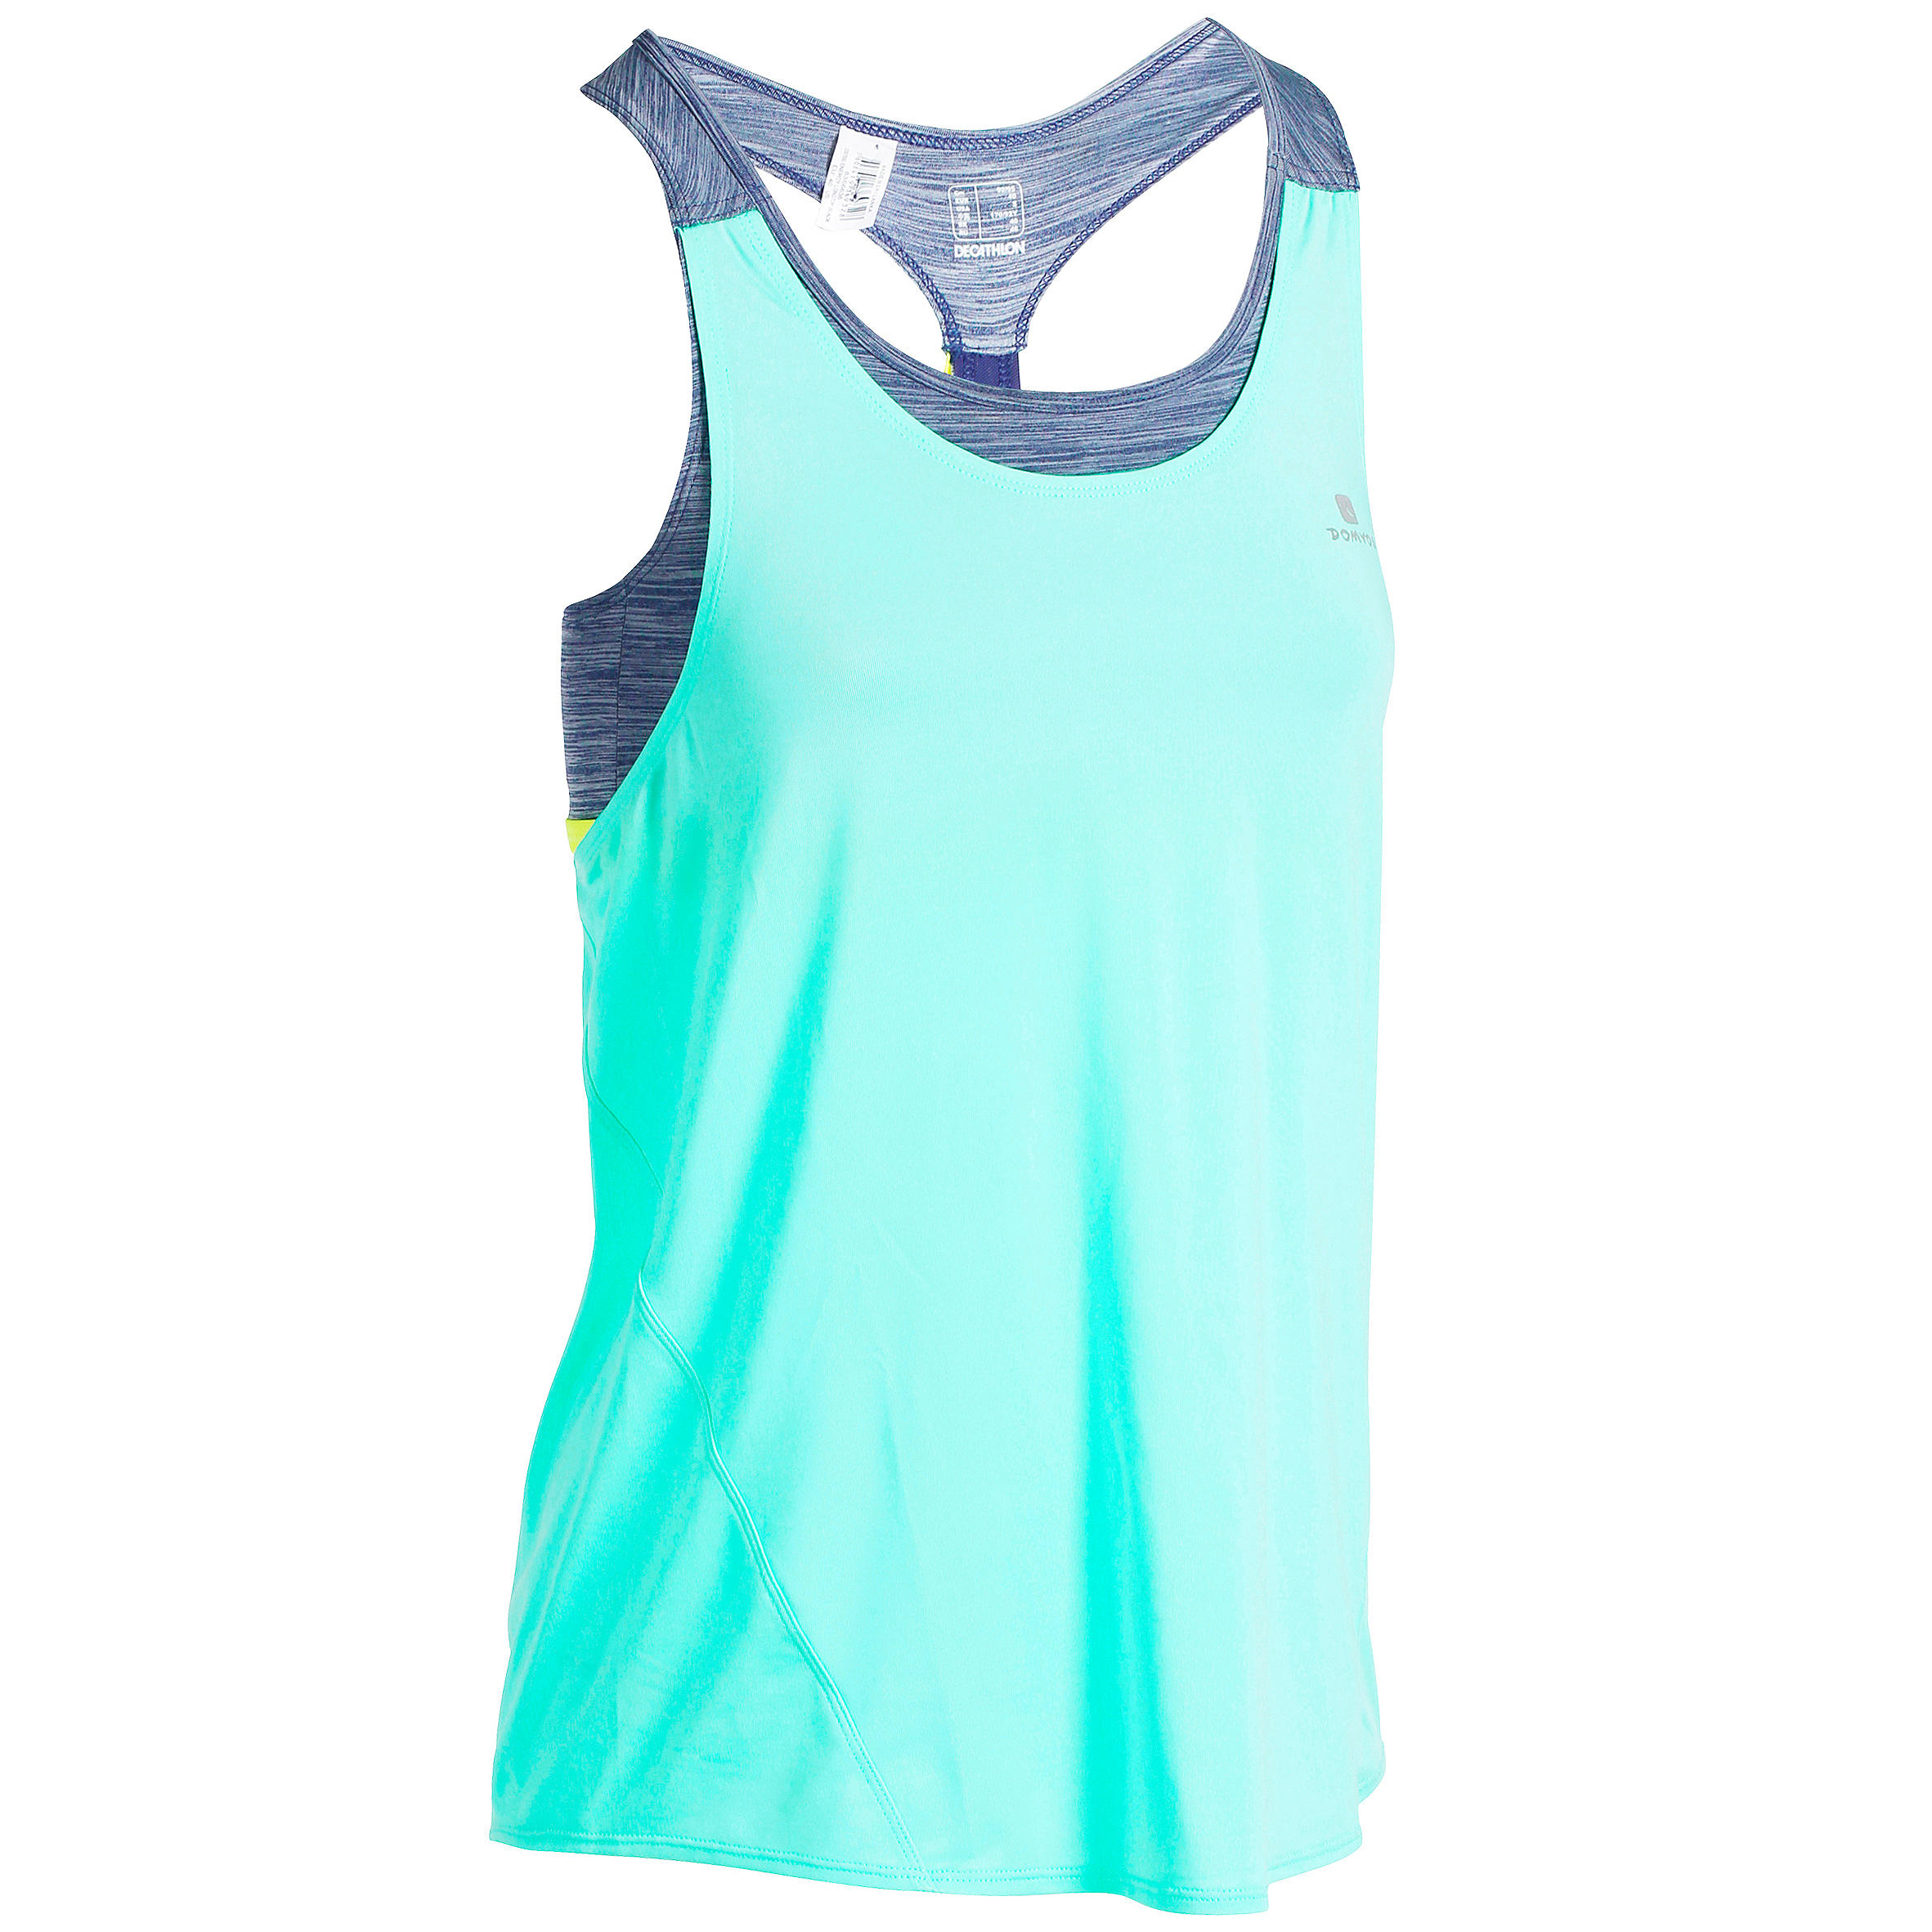 DOMYOS Energy+ Women's Fitness Tank Top With Built-in Bra - Blue